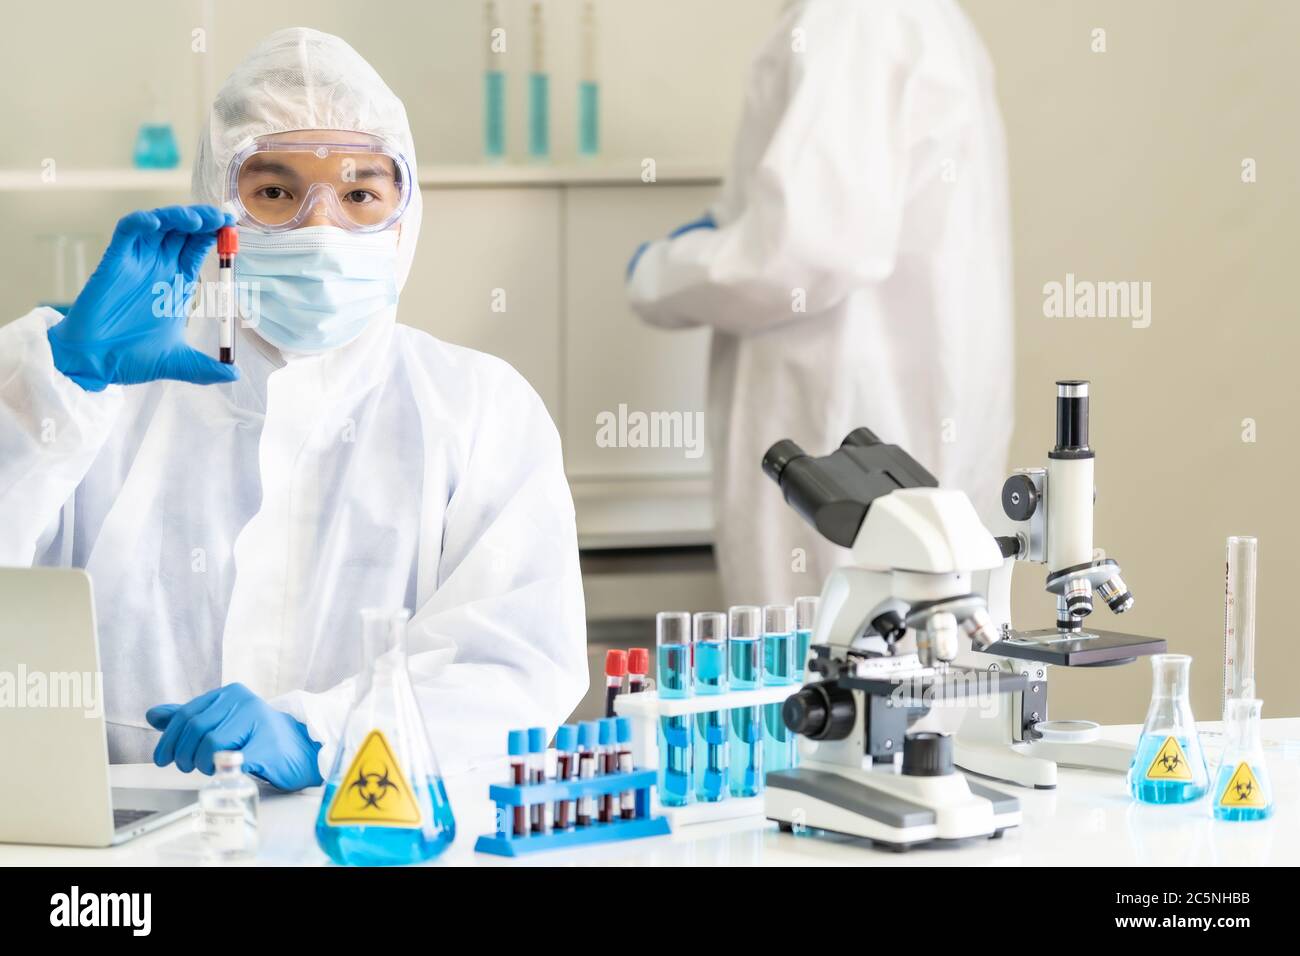 Scientists hold blood sample test tube and examine for his research and develop vaccine for coronavirus covid-19 pandemic with his colleague in backgr Stock Photo